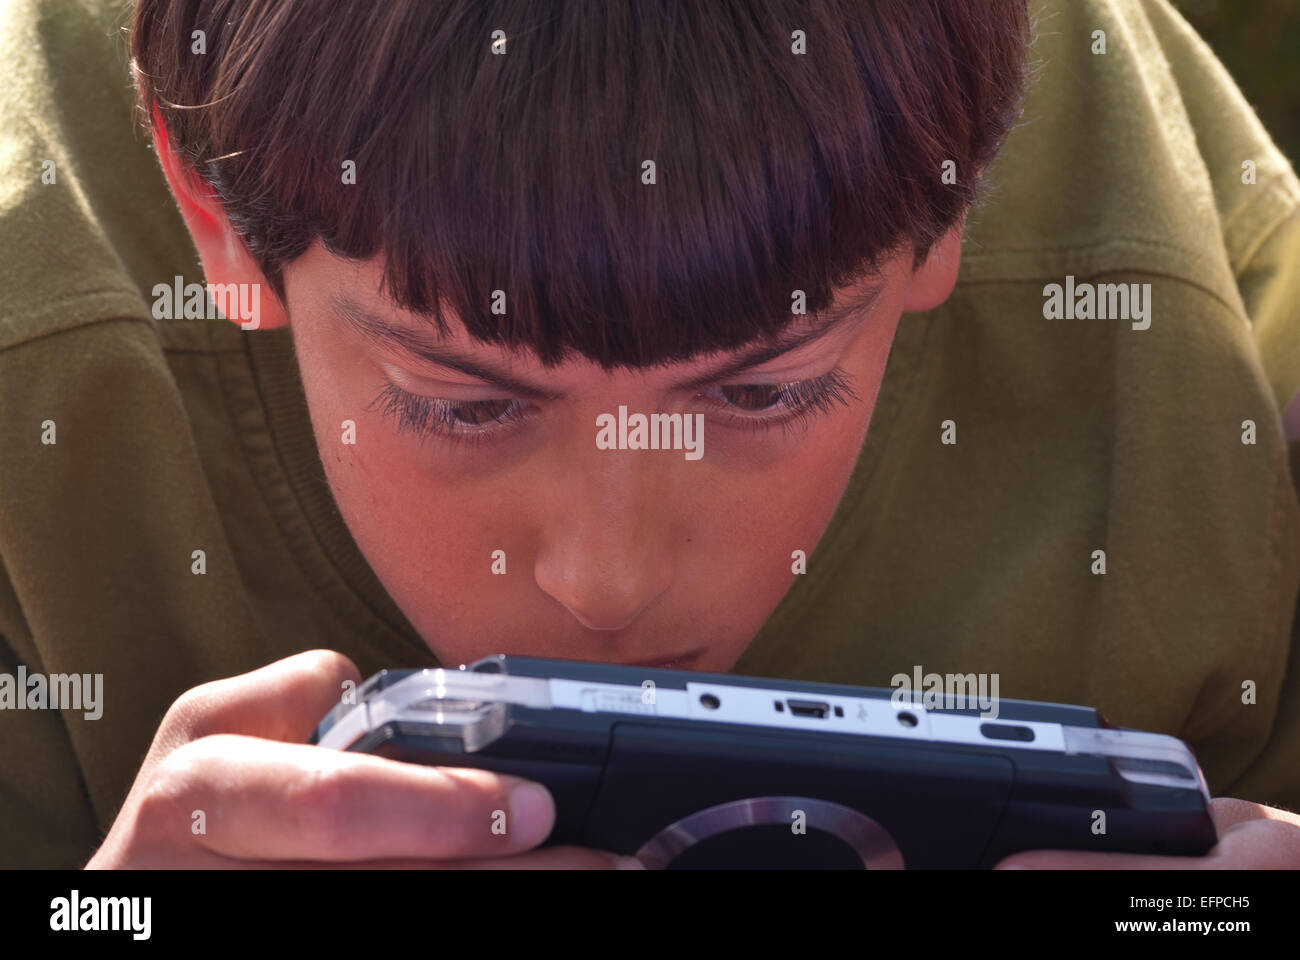 Intensive concentration and engagement with portable games console playing games outside looking at screen Stock Photo